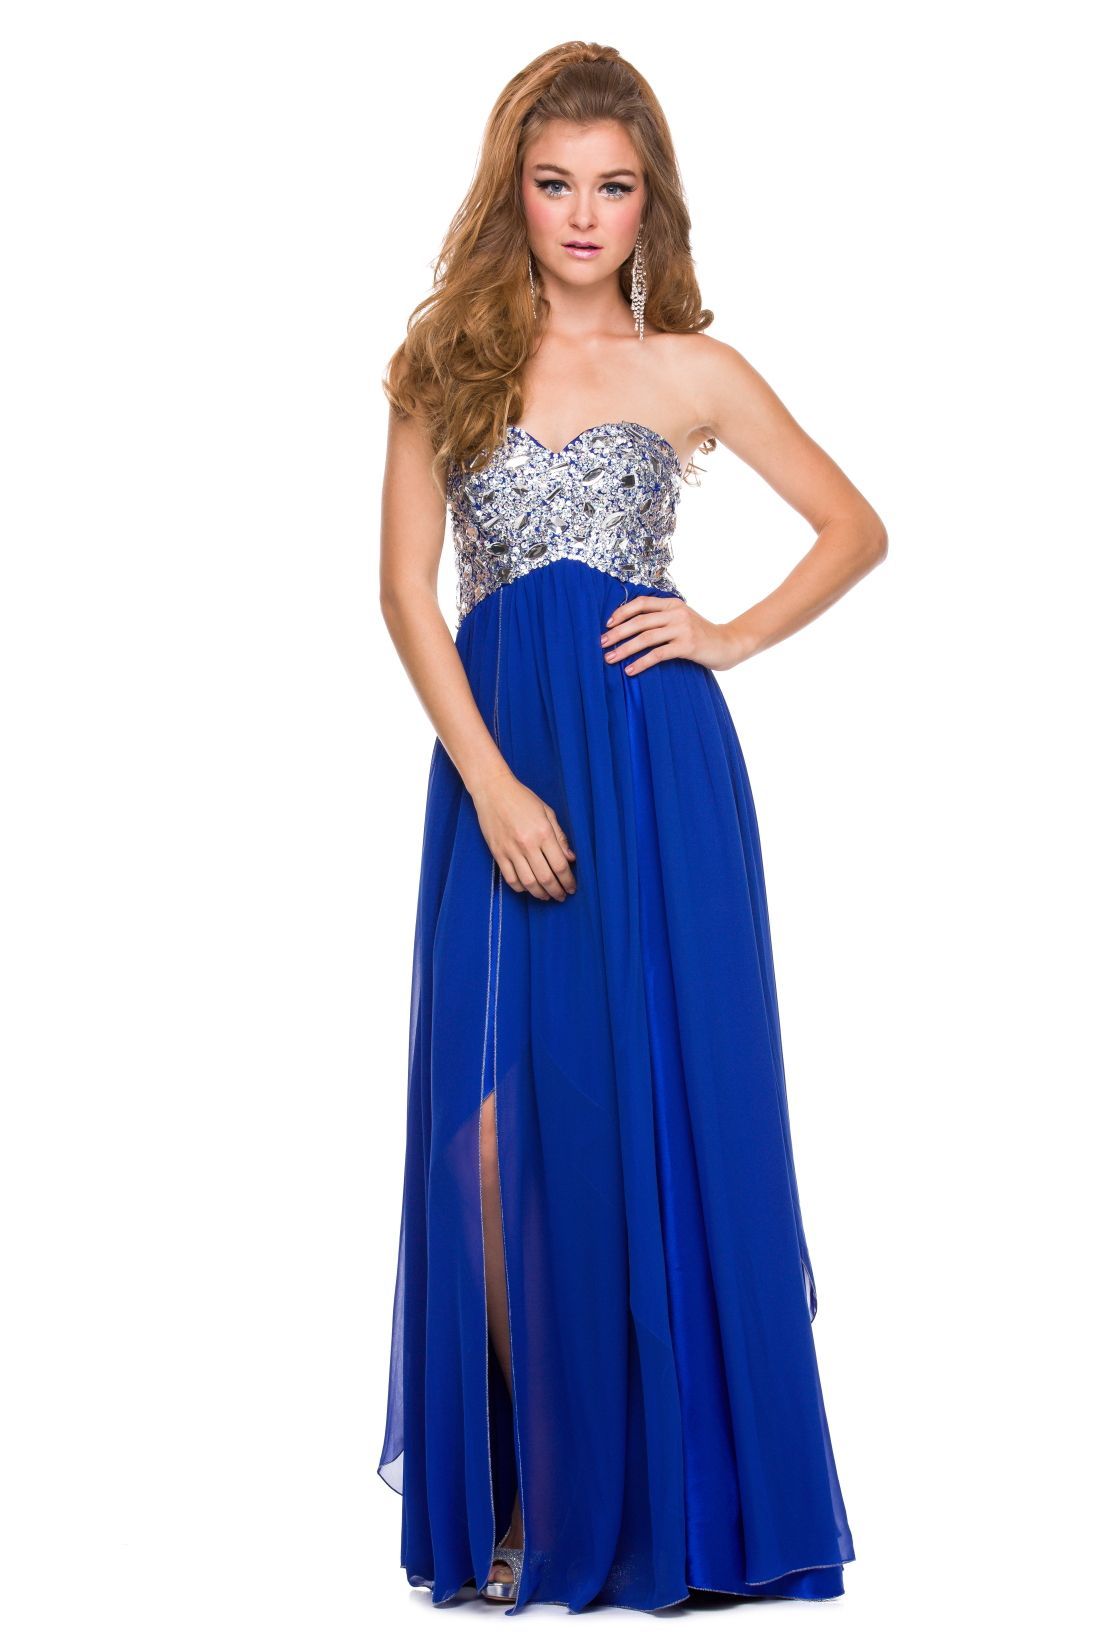 Strapless Royal Blue Prom Dresses Wallpaper (1095×1643). Royal Blue Bridesmaid Dresses, Beaded Evening Gowns, Prom Dresses